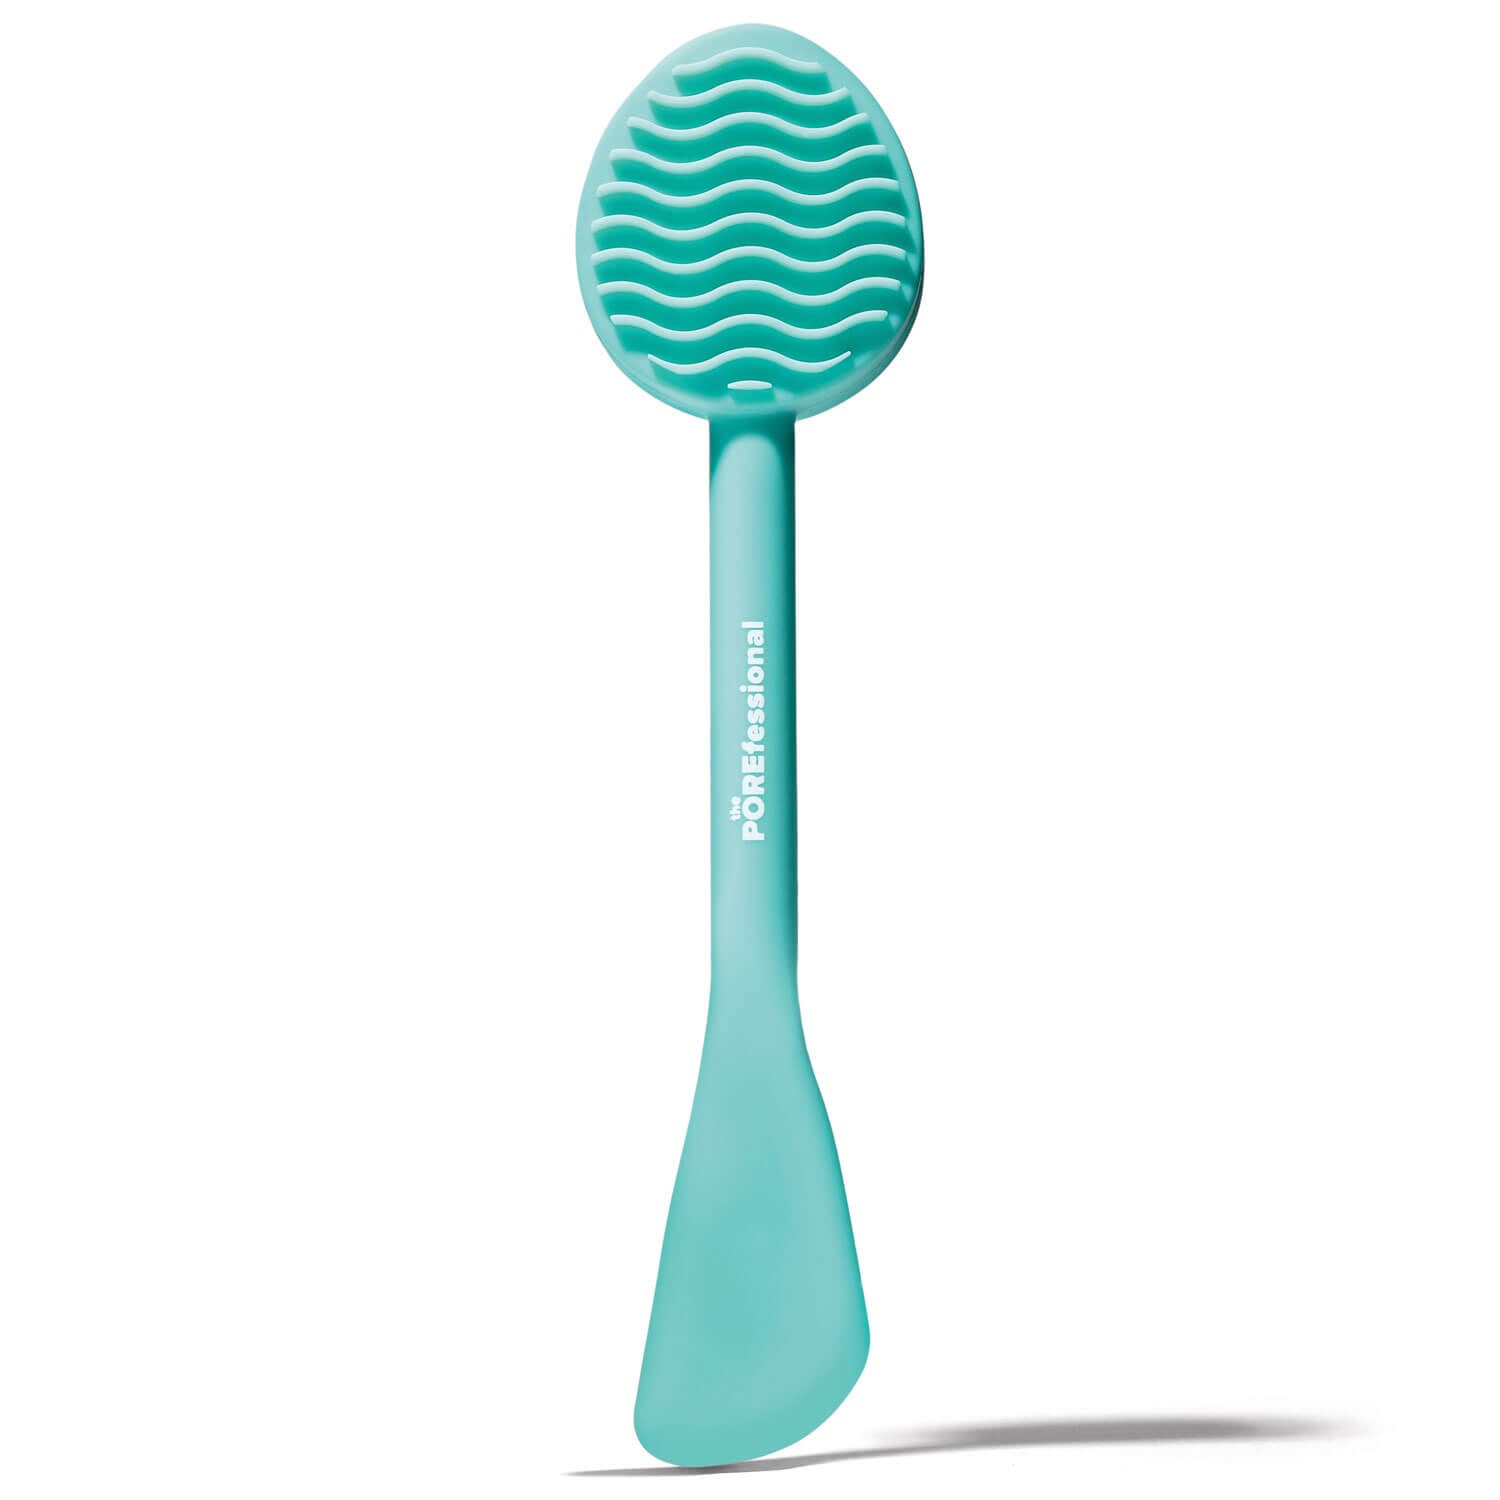 Benefit All-in-One Mask Wand silicone mask &amp; cleansing tool 1 Shaws Department Stores